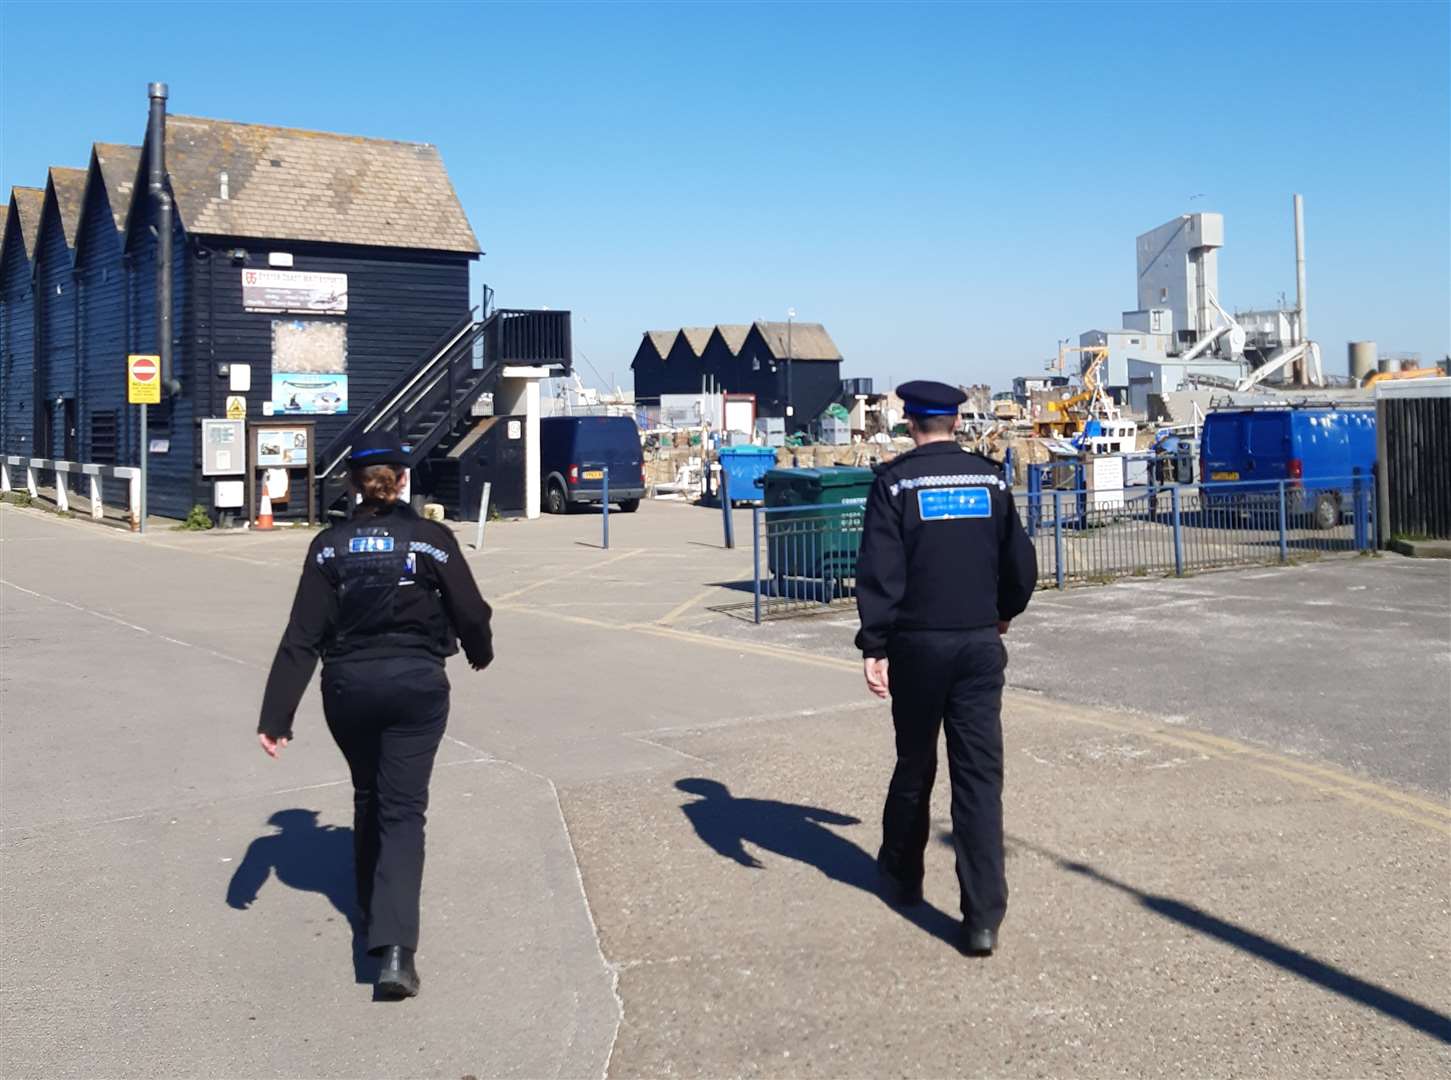 Police out on patrol in Whitstable during lockdown.